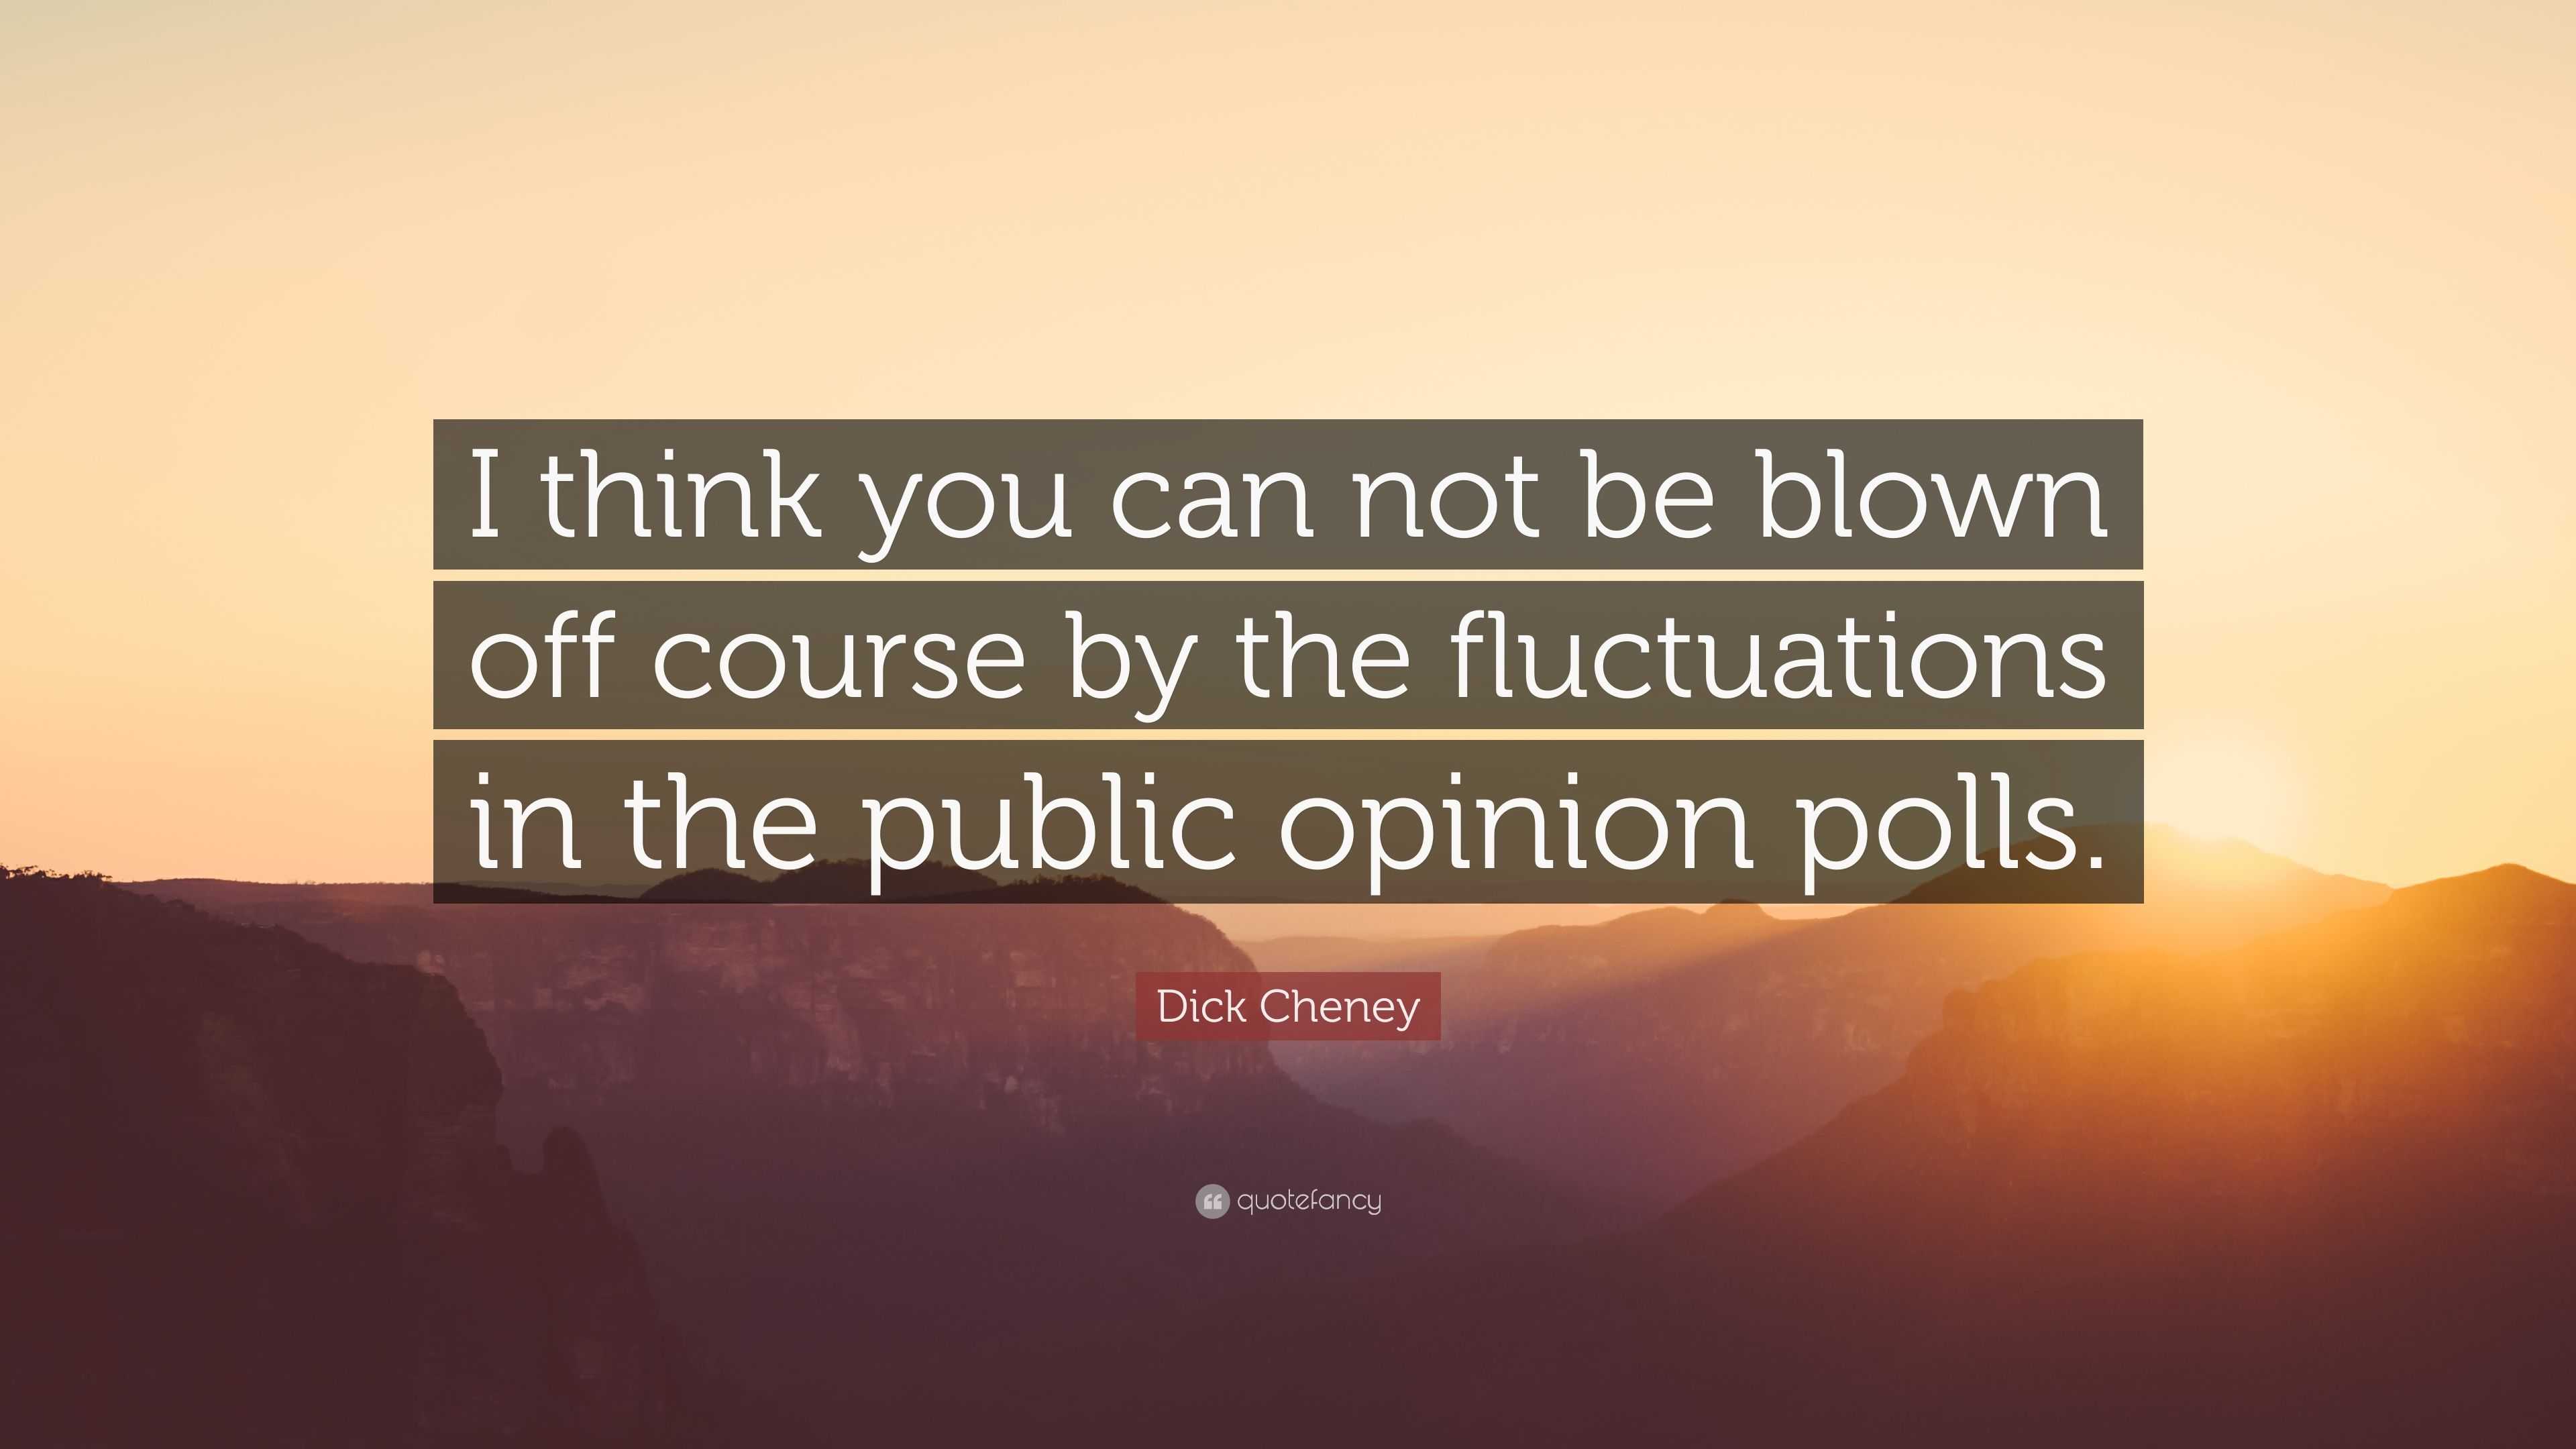 Dick Cheney Quote “i Think You Can Not Be Blown Off Course By The Fluctuations In The Public 